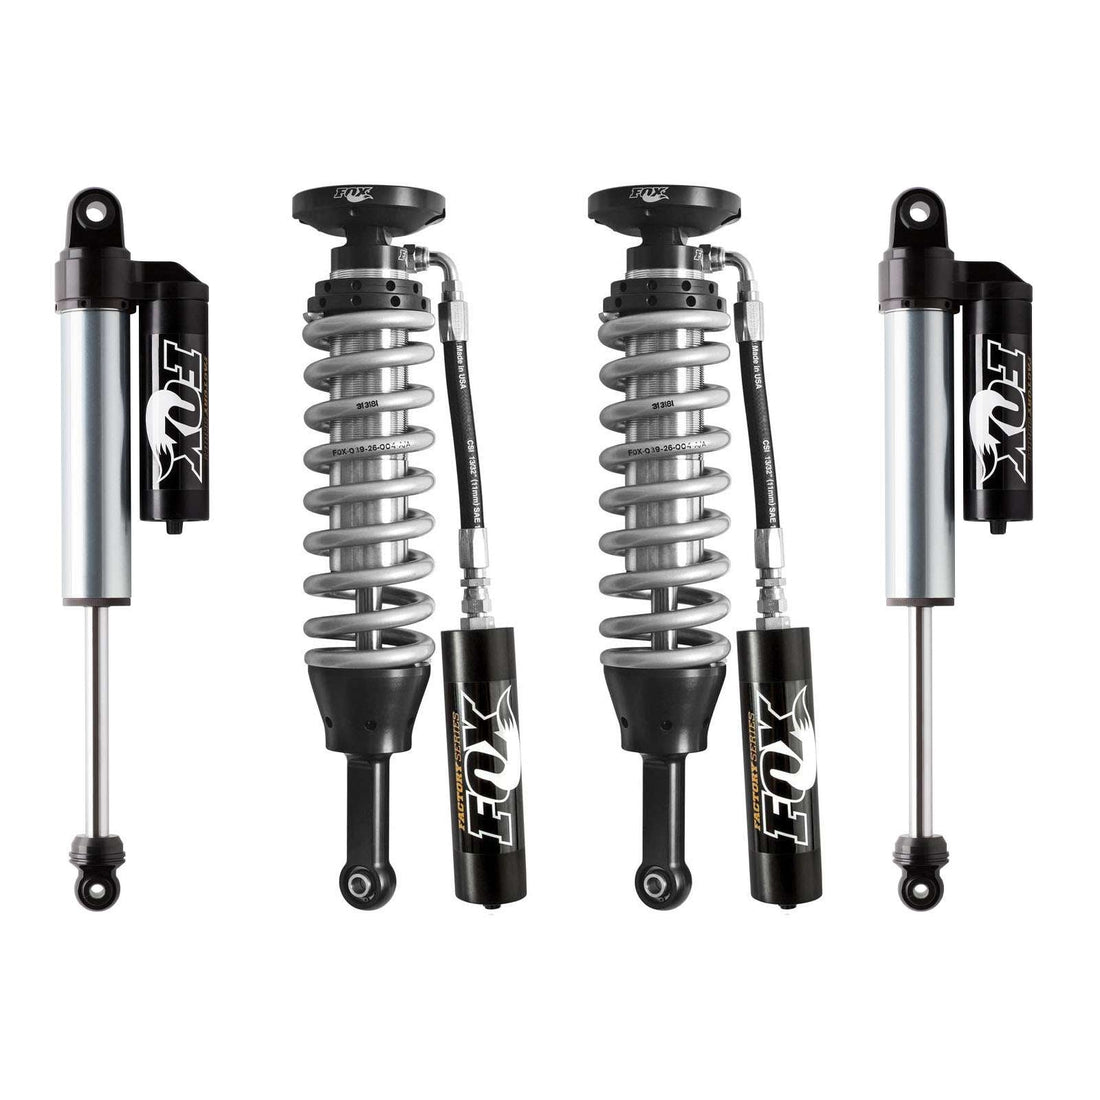 Fox 2.5 Factory Series Coilovers & Shocks w/ Reservoirs Set for 2014-2019 Ford F150 4WD